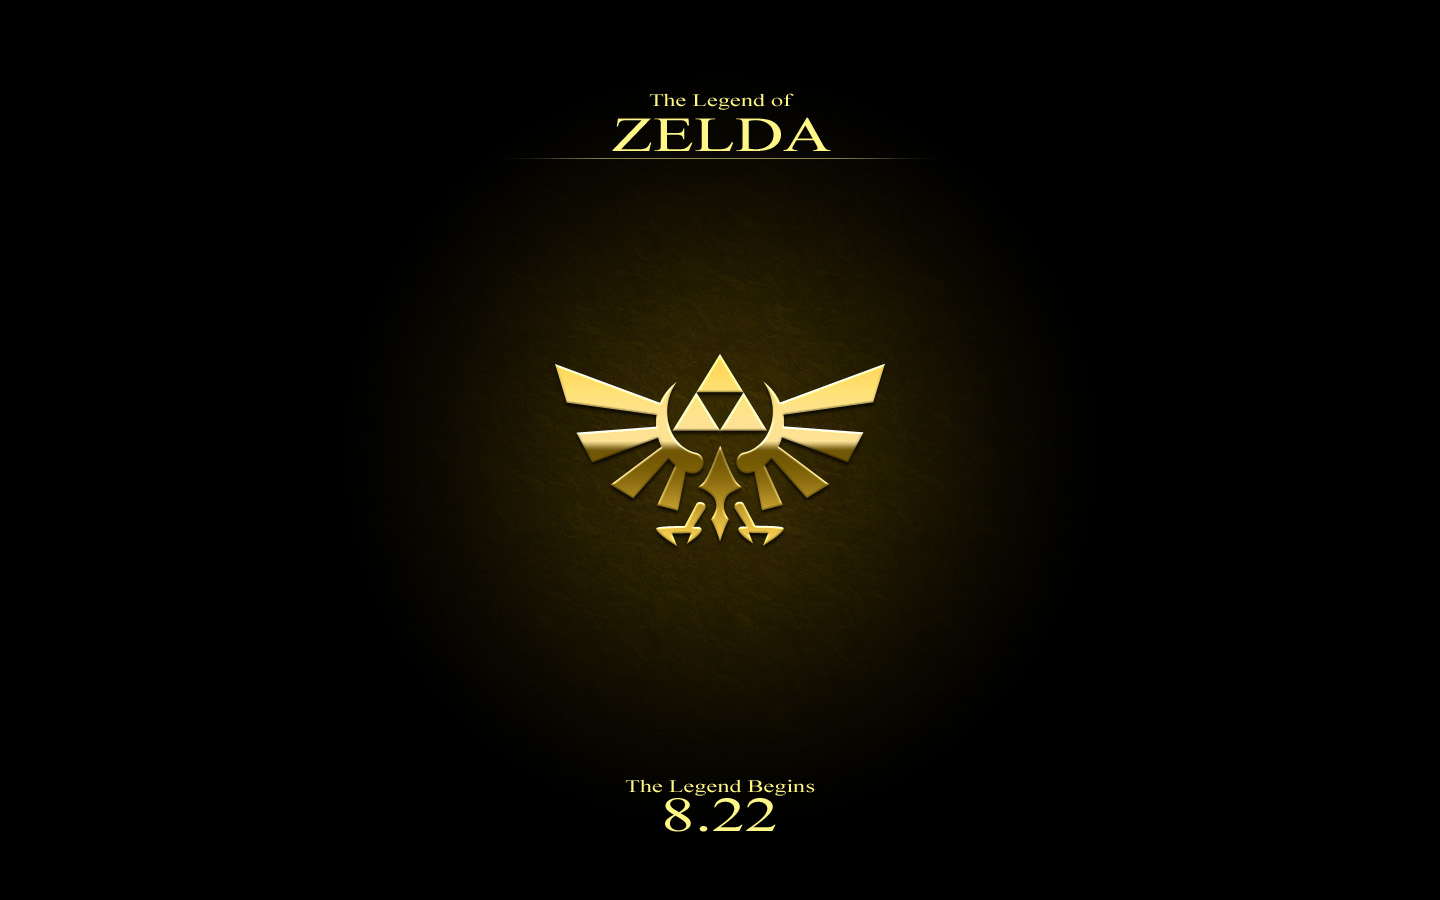 Zelda Image And Wallpaper For Mac Pc Bsnscb